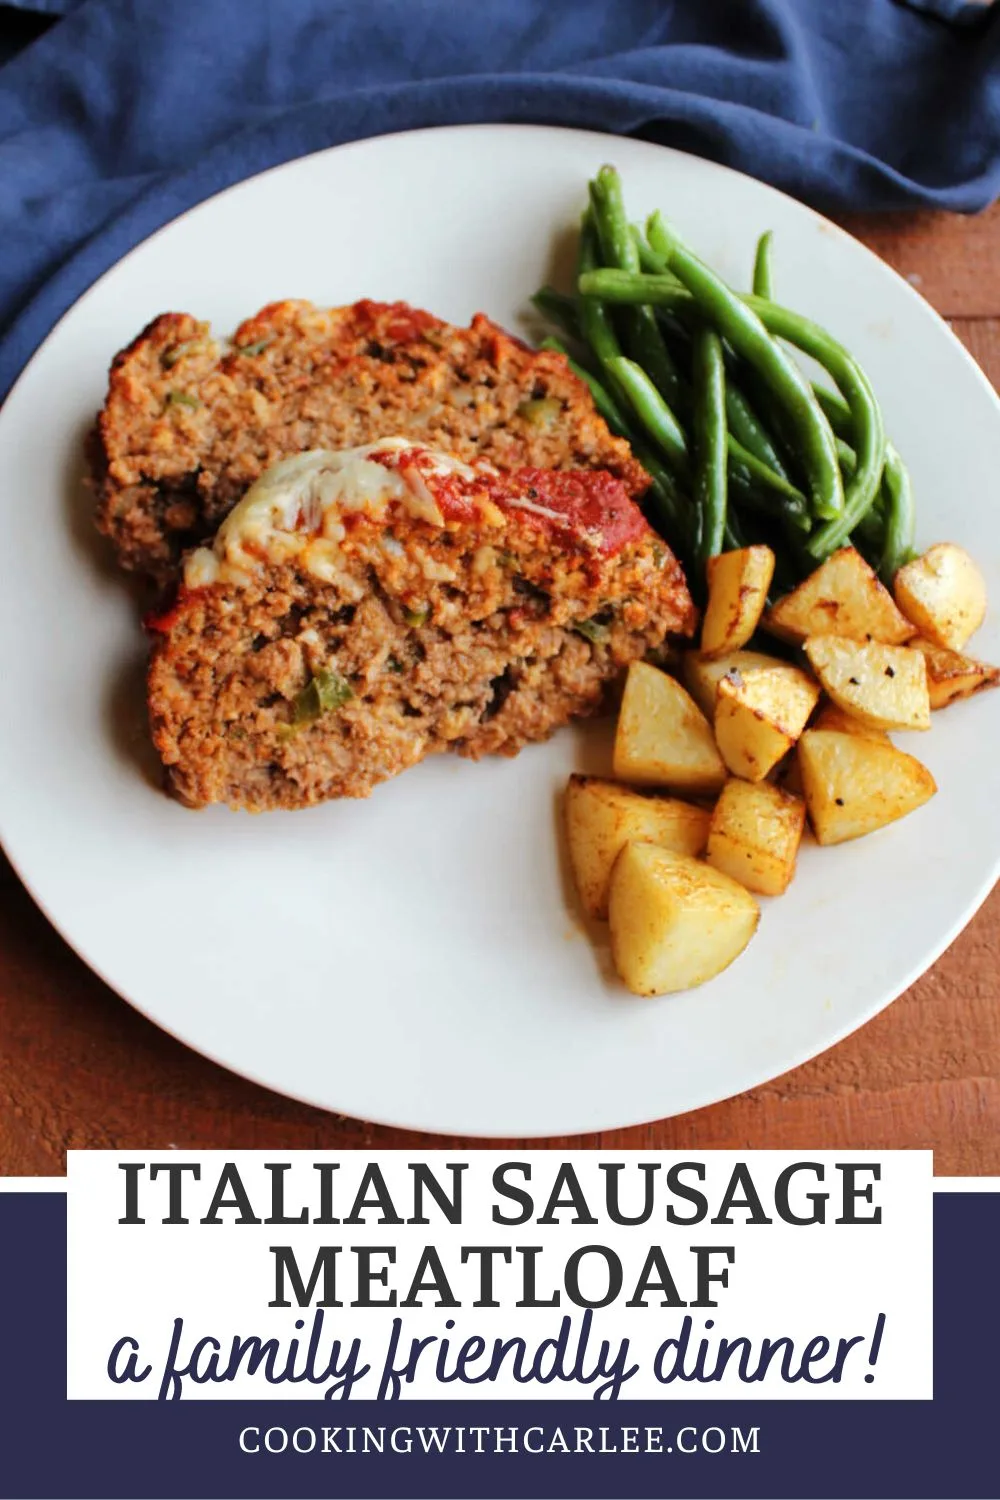 This Italian meatloaf is classic comfort with a twist. The marinara keeps the flavorful meat mixture moist, and the cheese makes it extra delicious.